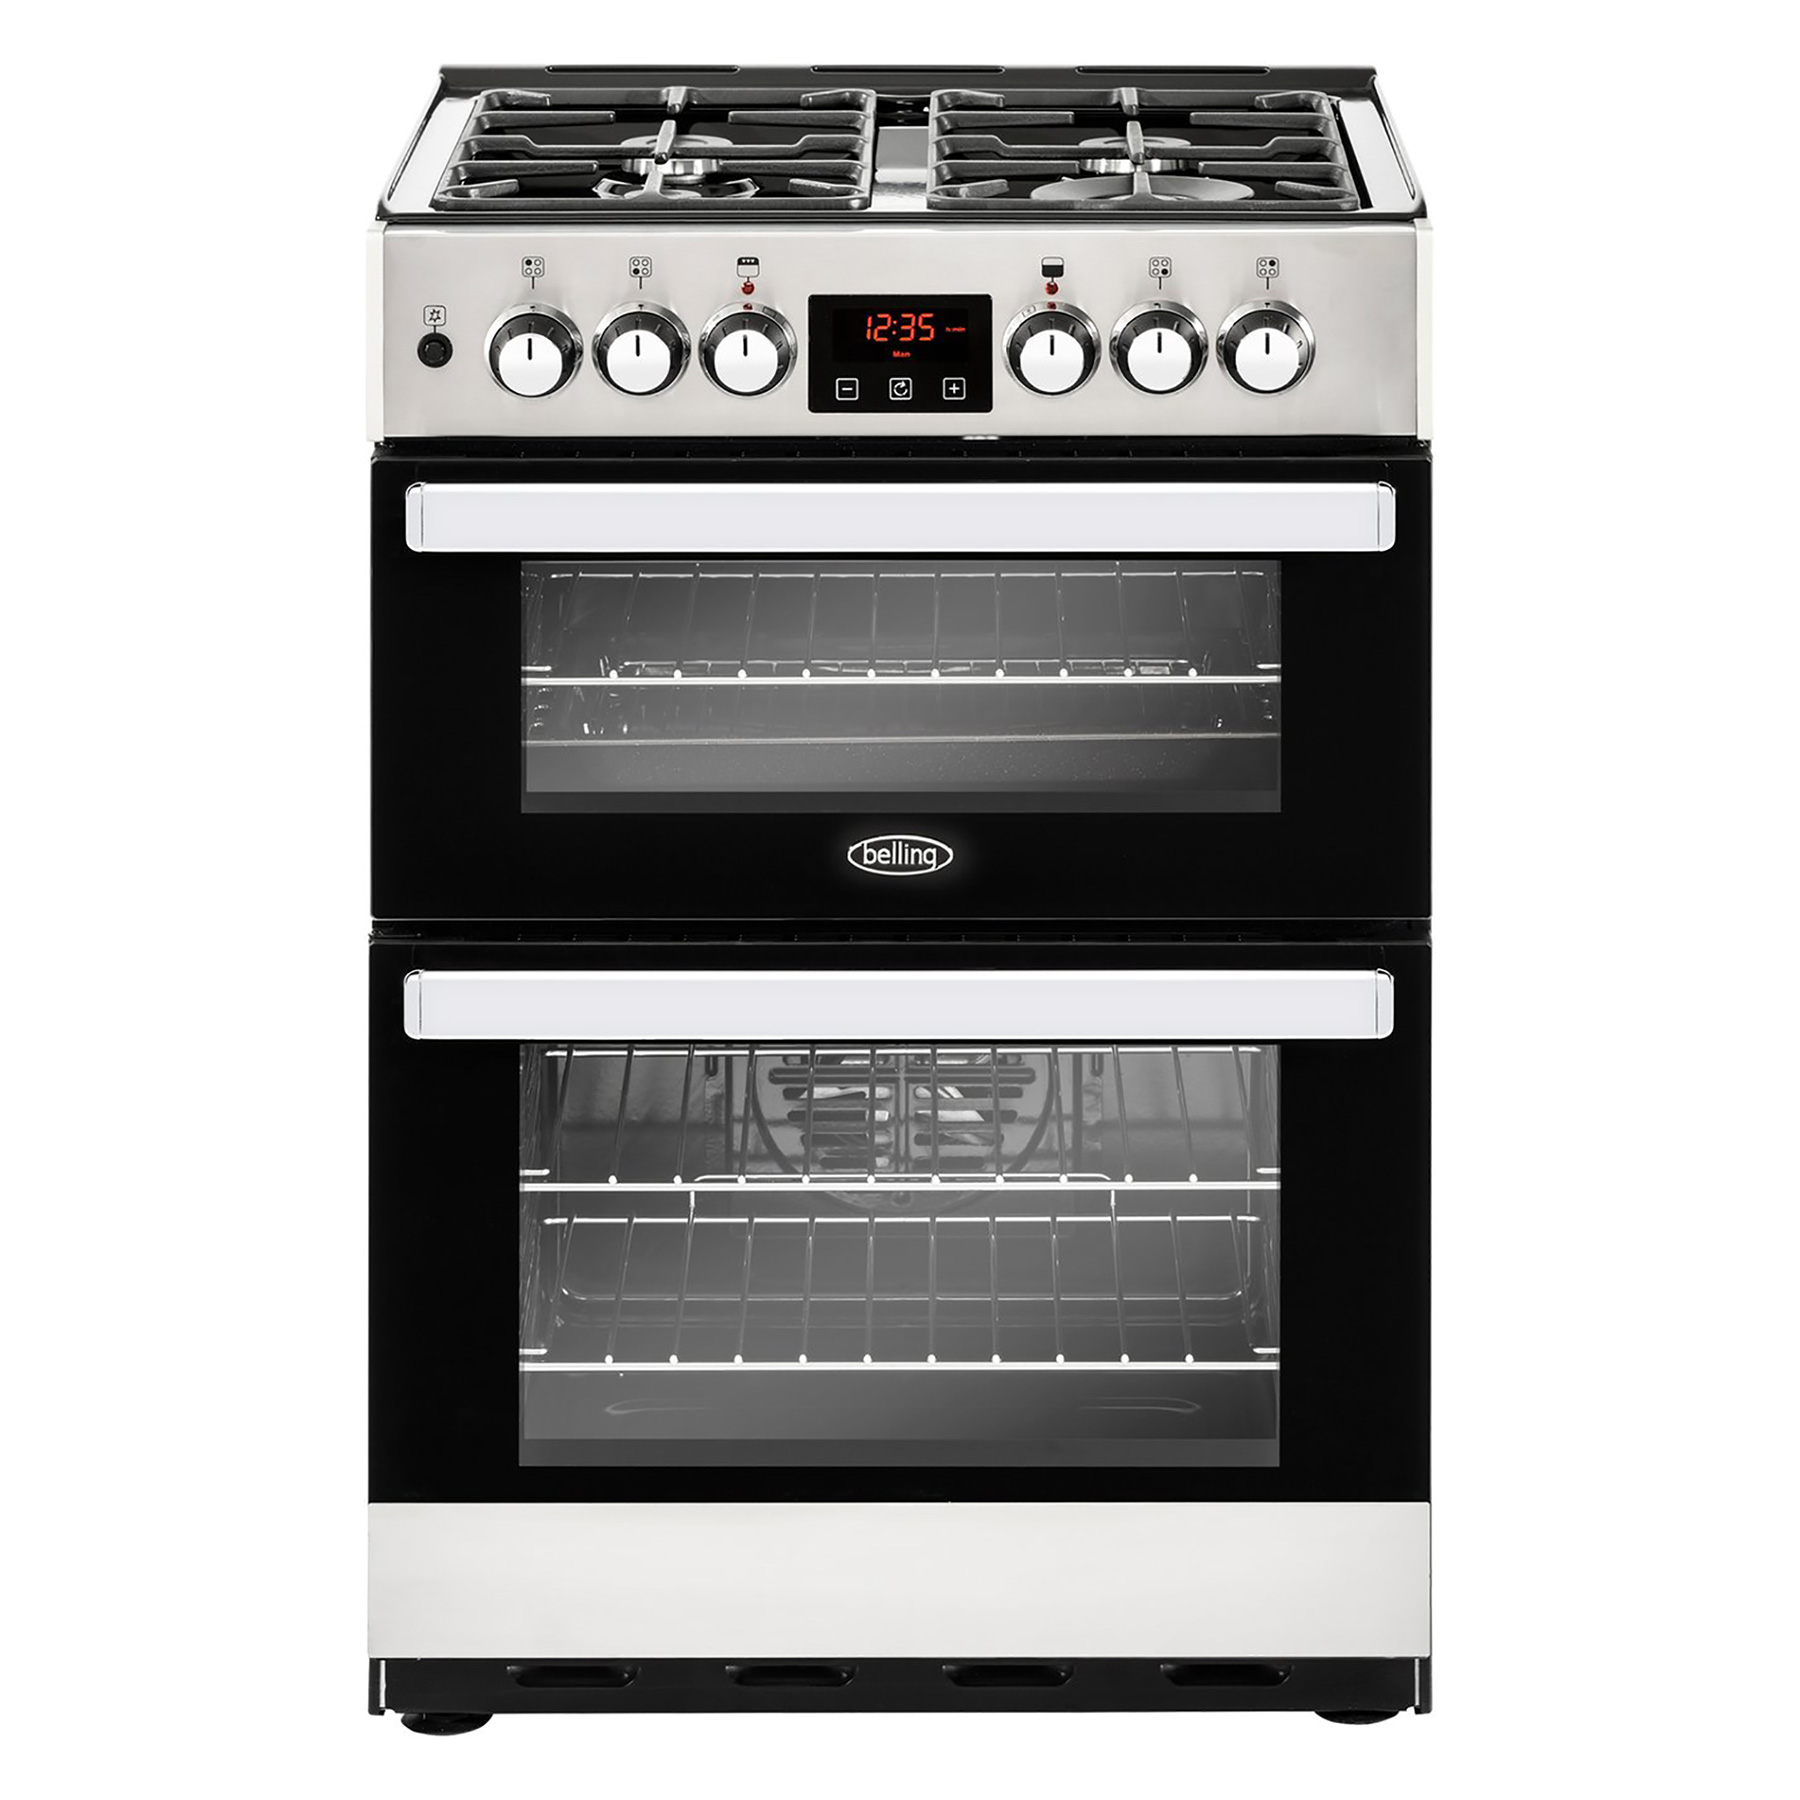 Belling 444410822 60cm Cookcentre 60DF D Oven Dual Fuel Cooker in St S